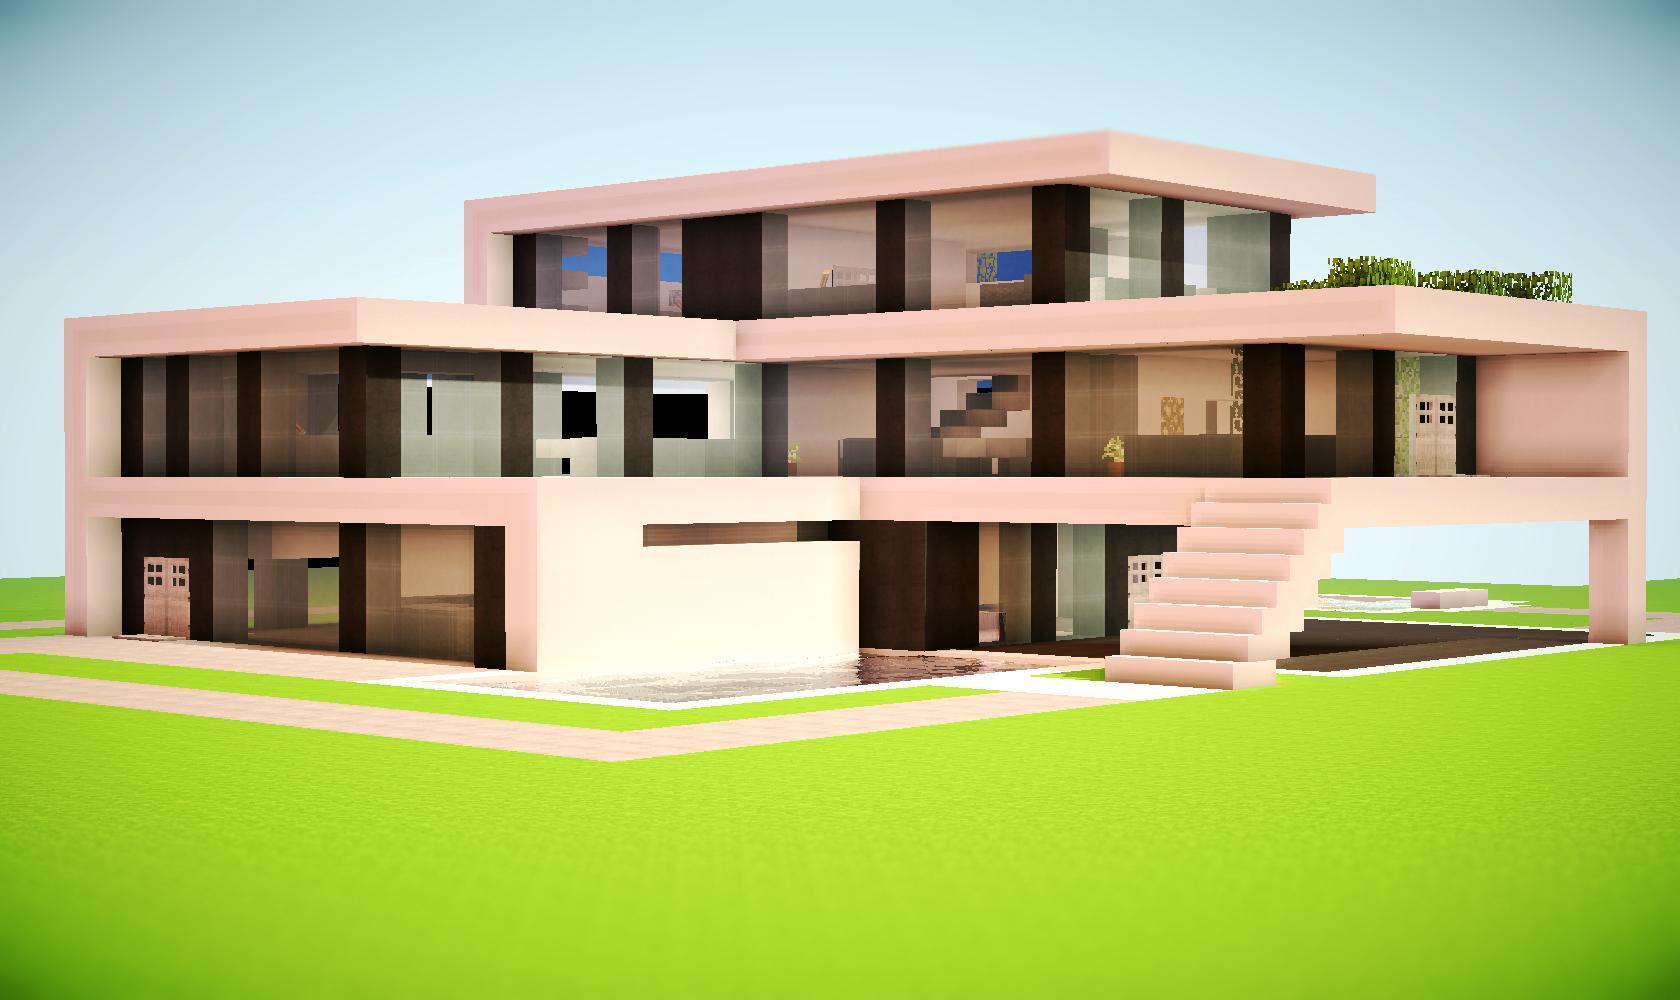 How To Make A Mansion In Minecraft 2015. trendminicraft